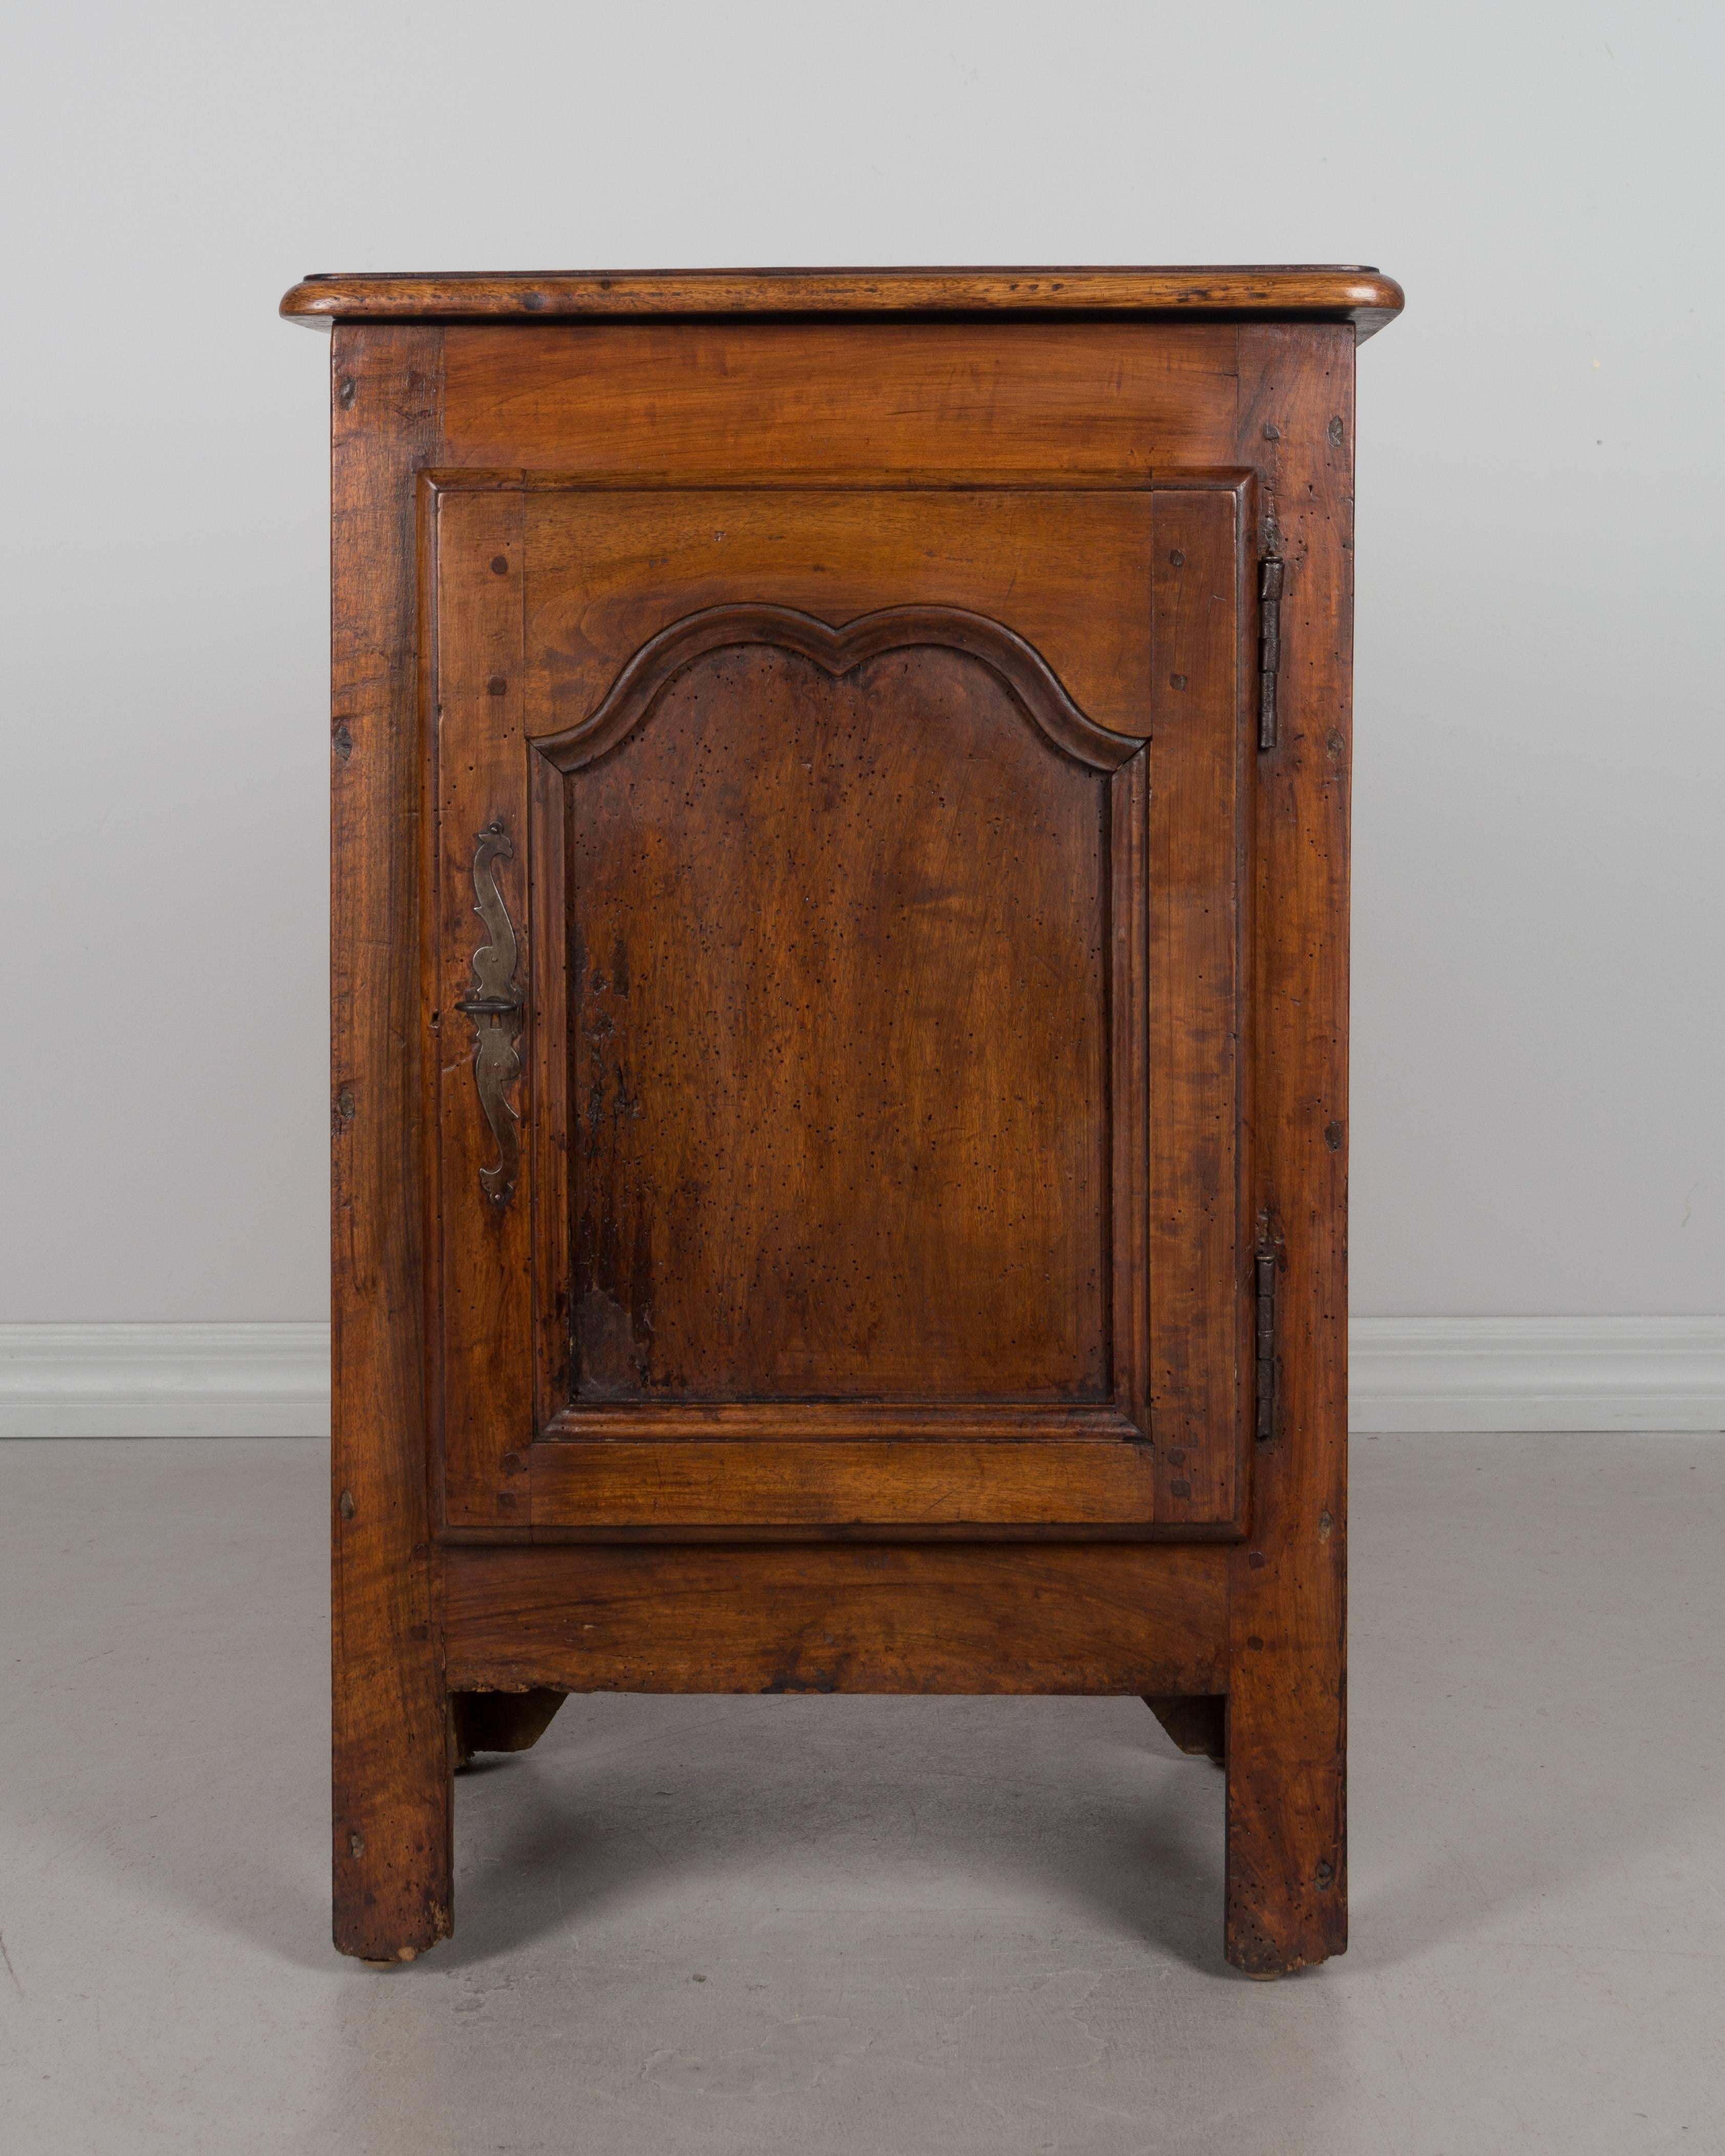 An early 19th century rustic French Country cabinet with hinged top and a door opening to a single shelf. Made of solid walnut and pine with waxed patina. Beautiful character to the wood with knots and old signs of worms that are no longer active.